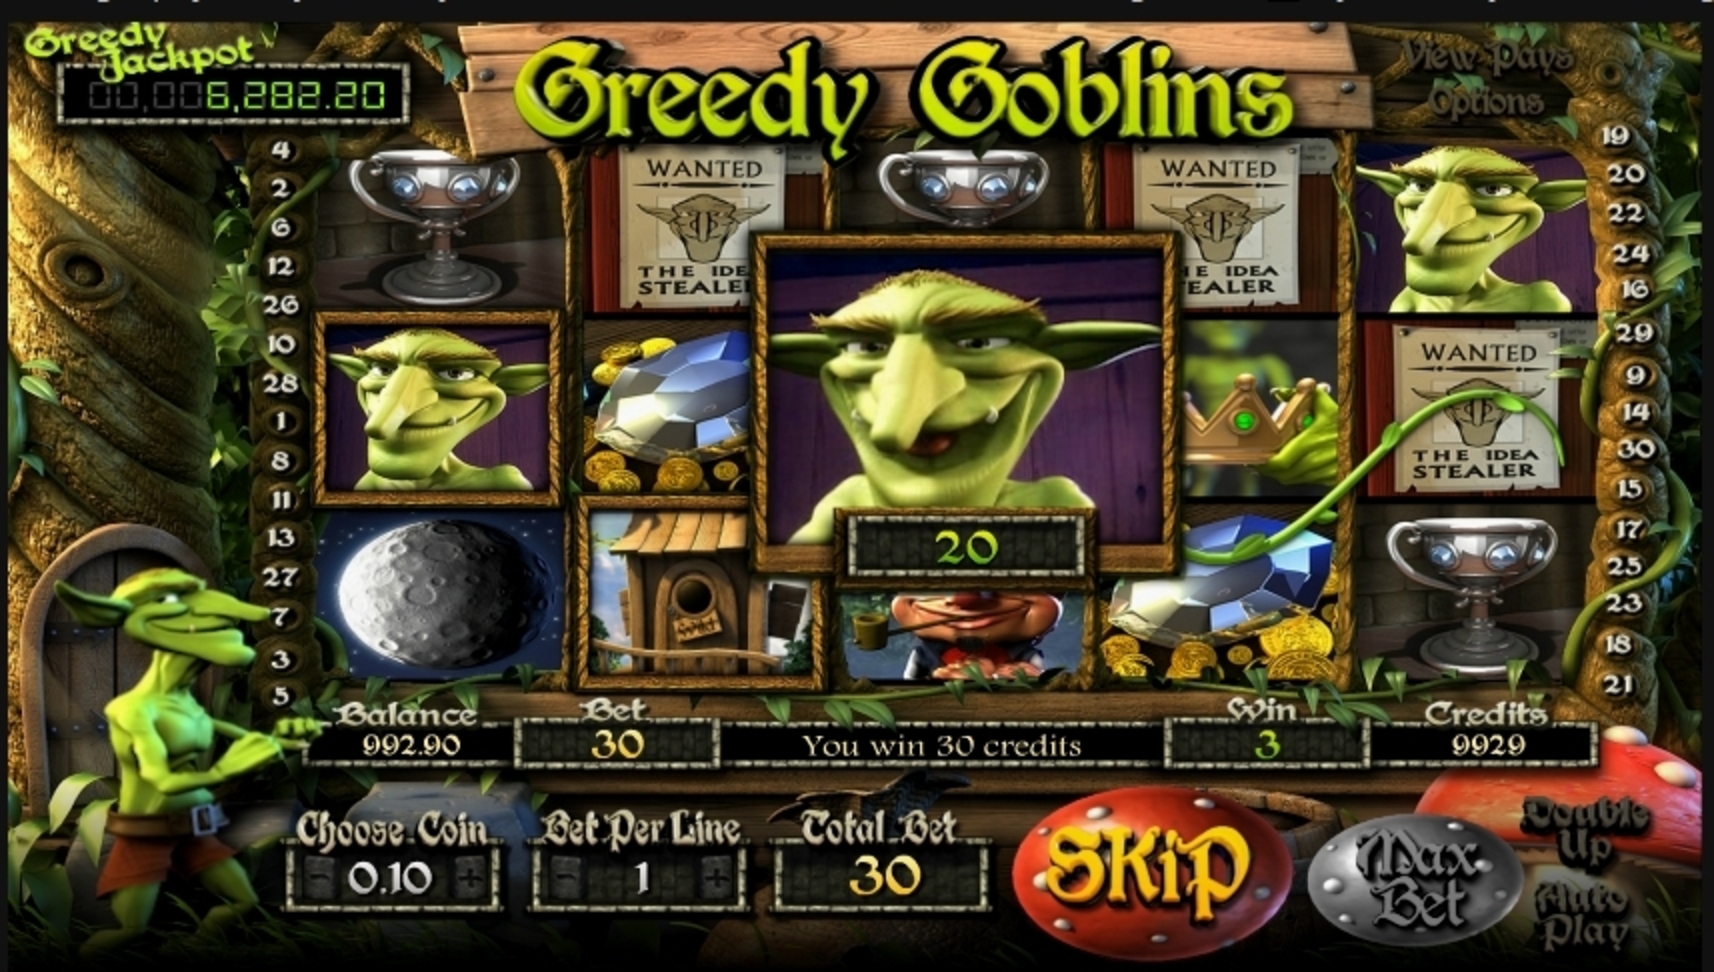 Win Money in Greedy Goblins Free Slot Game by Betsoft